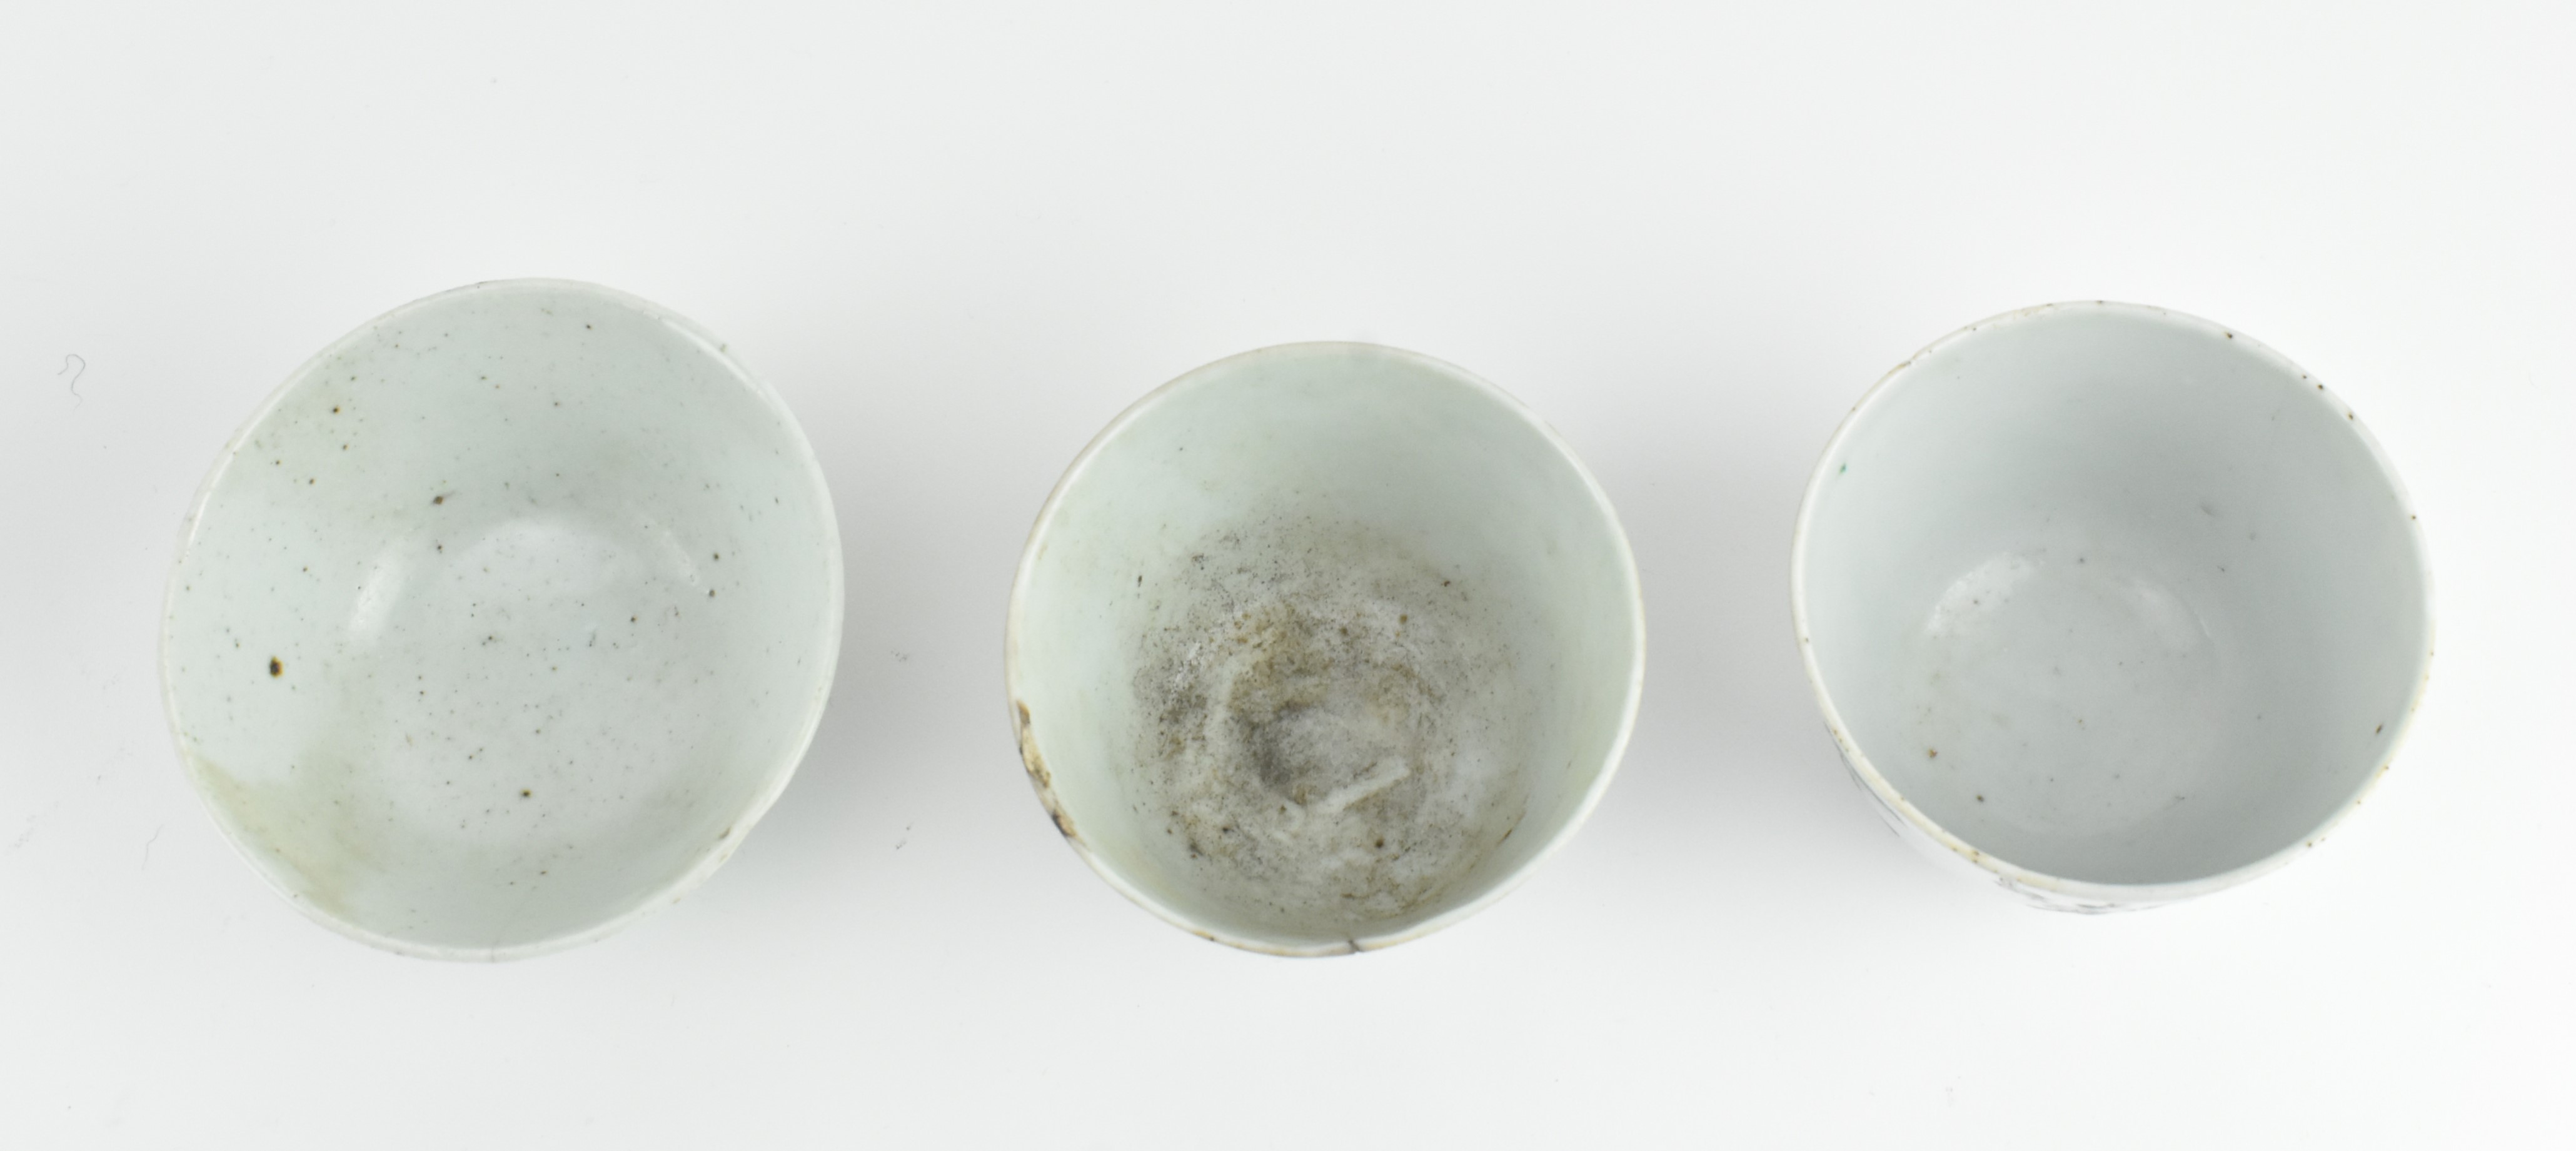 GROUP OF SIX QING DYNASTY CERAMIC ITEMS 清 陶瓷六件 - Image 3 of 7